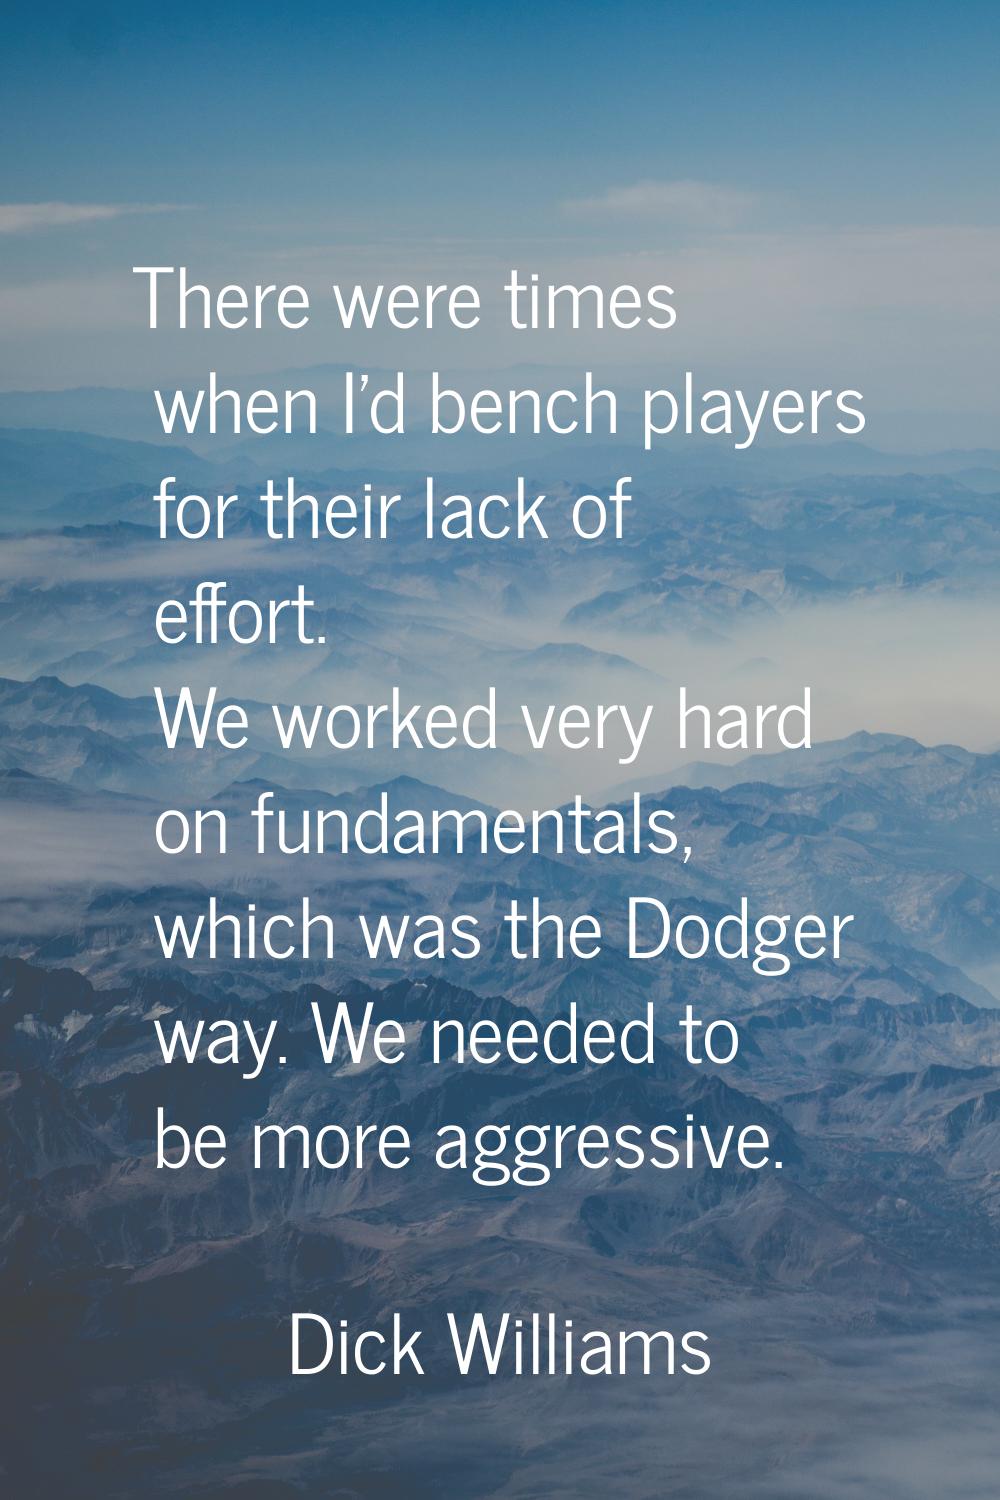 There were times when I'd bench players for their lack of effort. We worked very hard on fundamenta